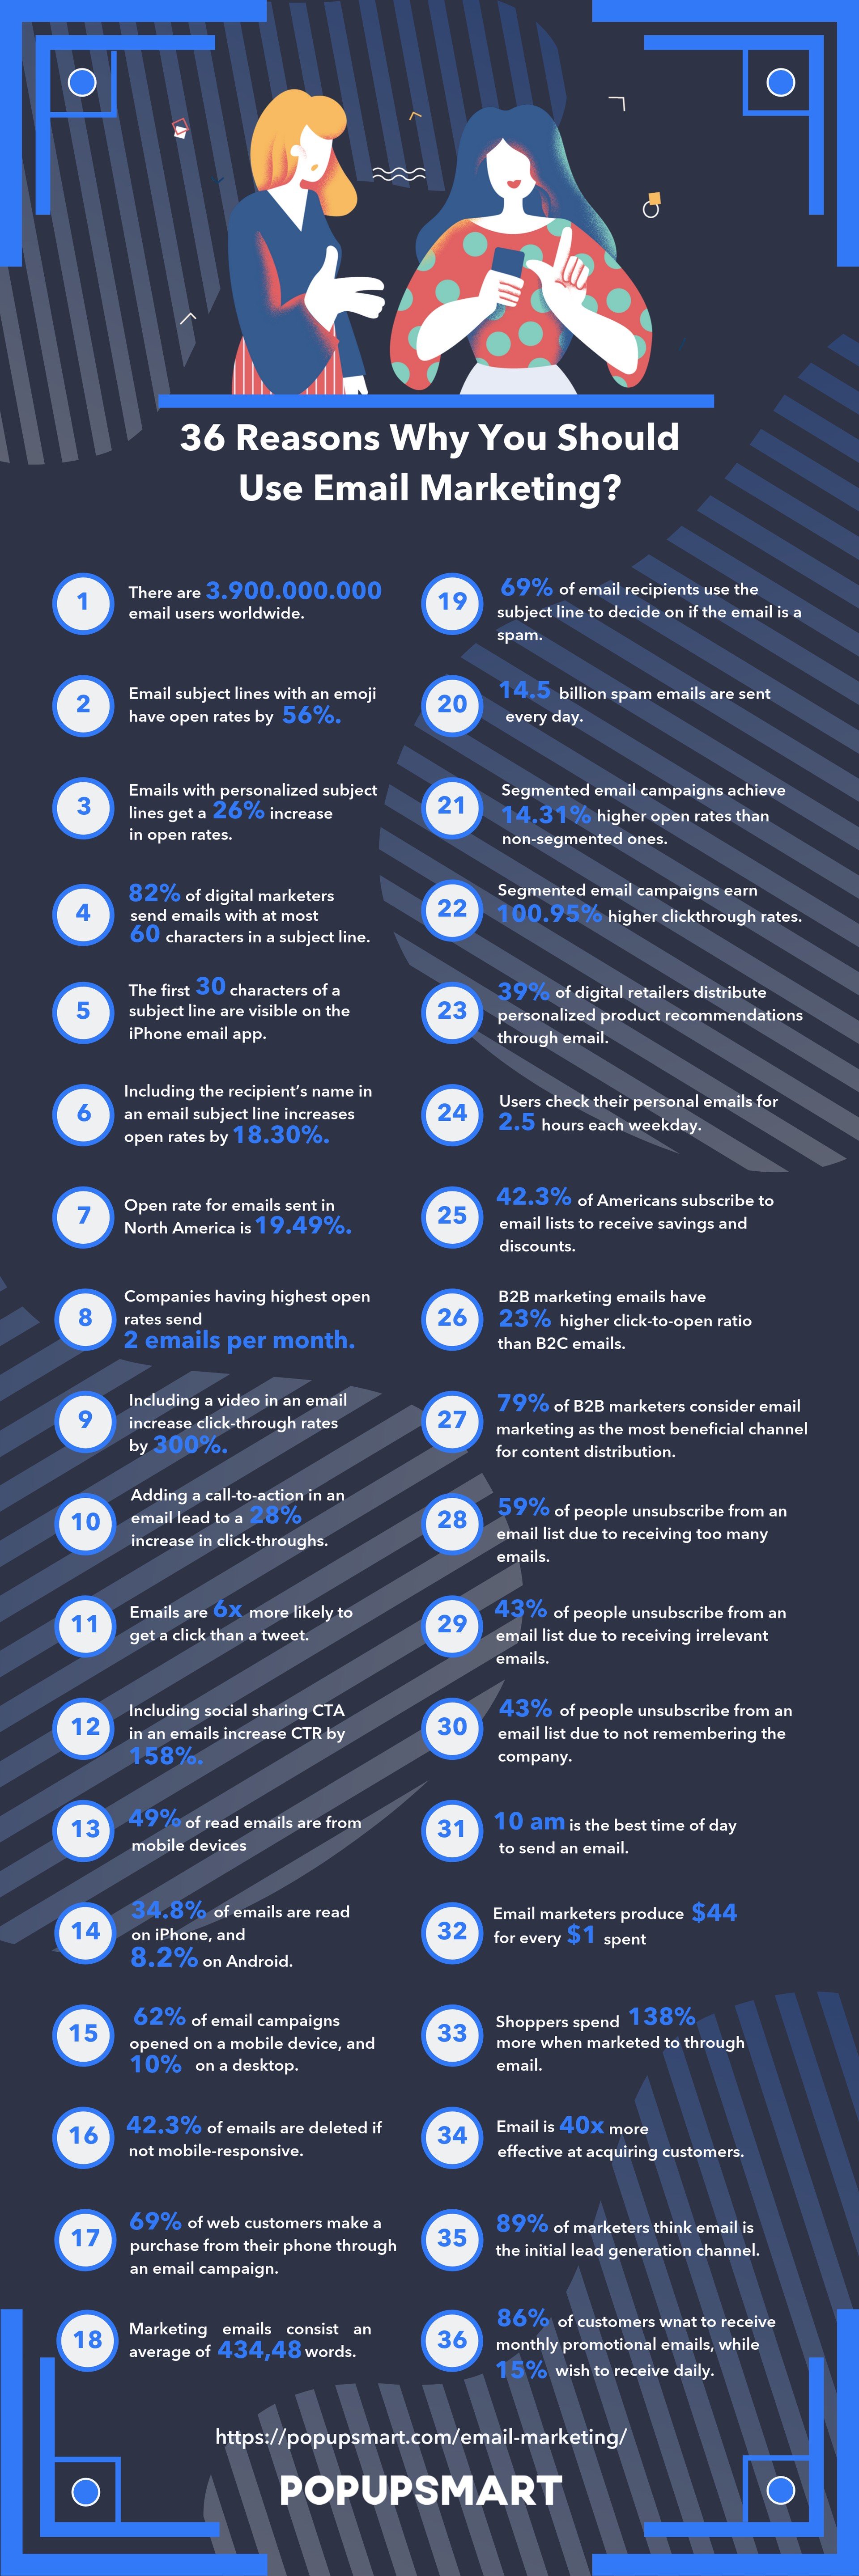 36 reasons why you should use email marketing infographic